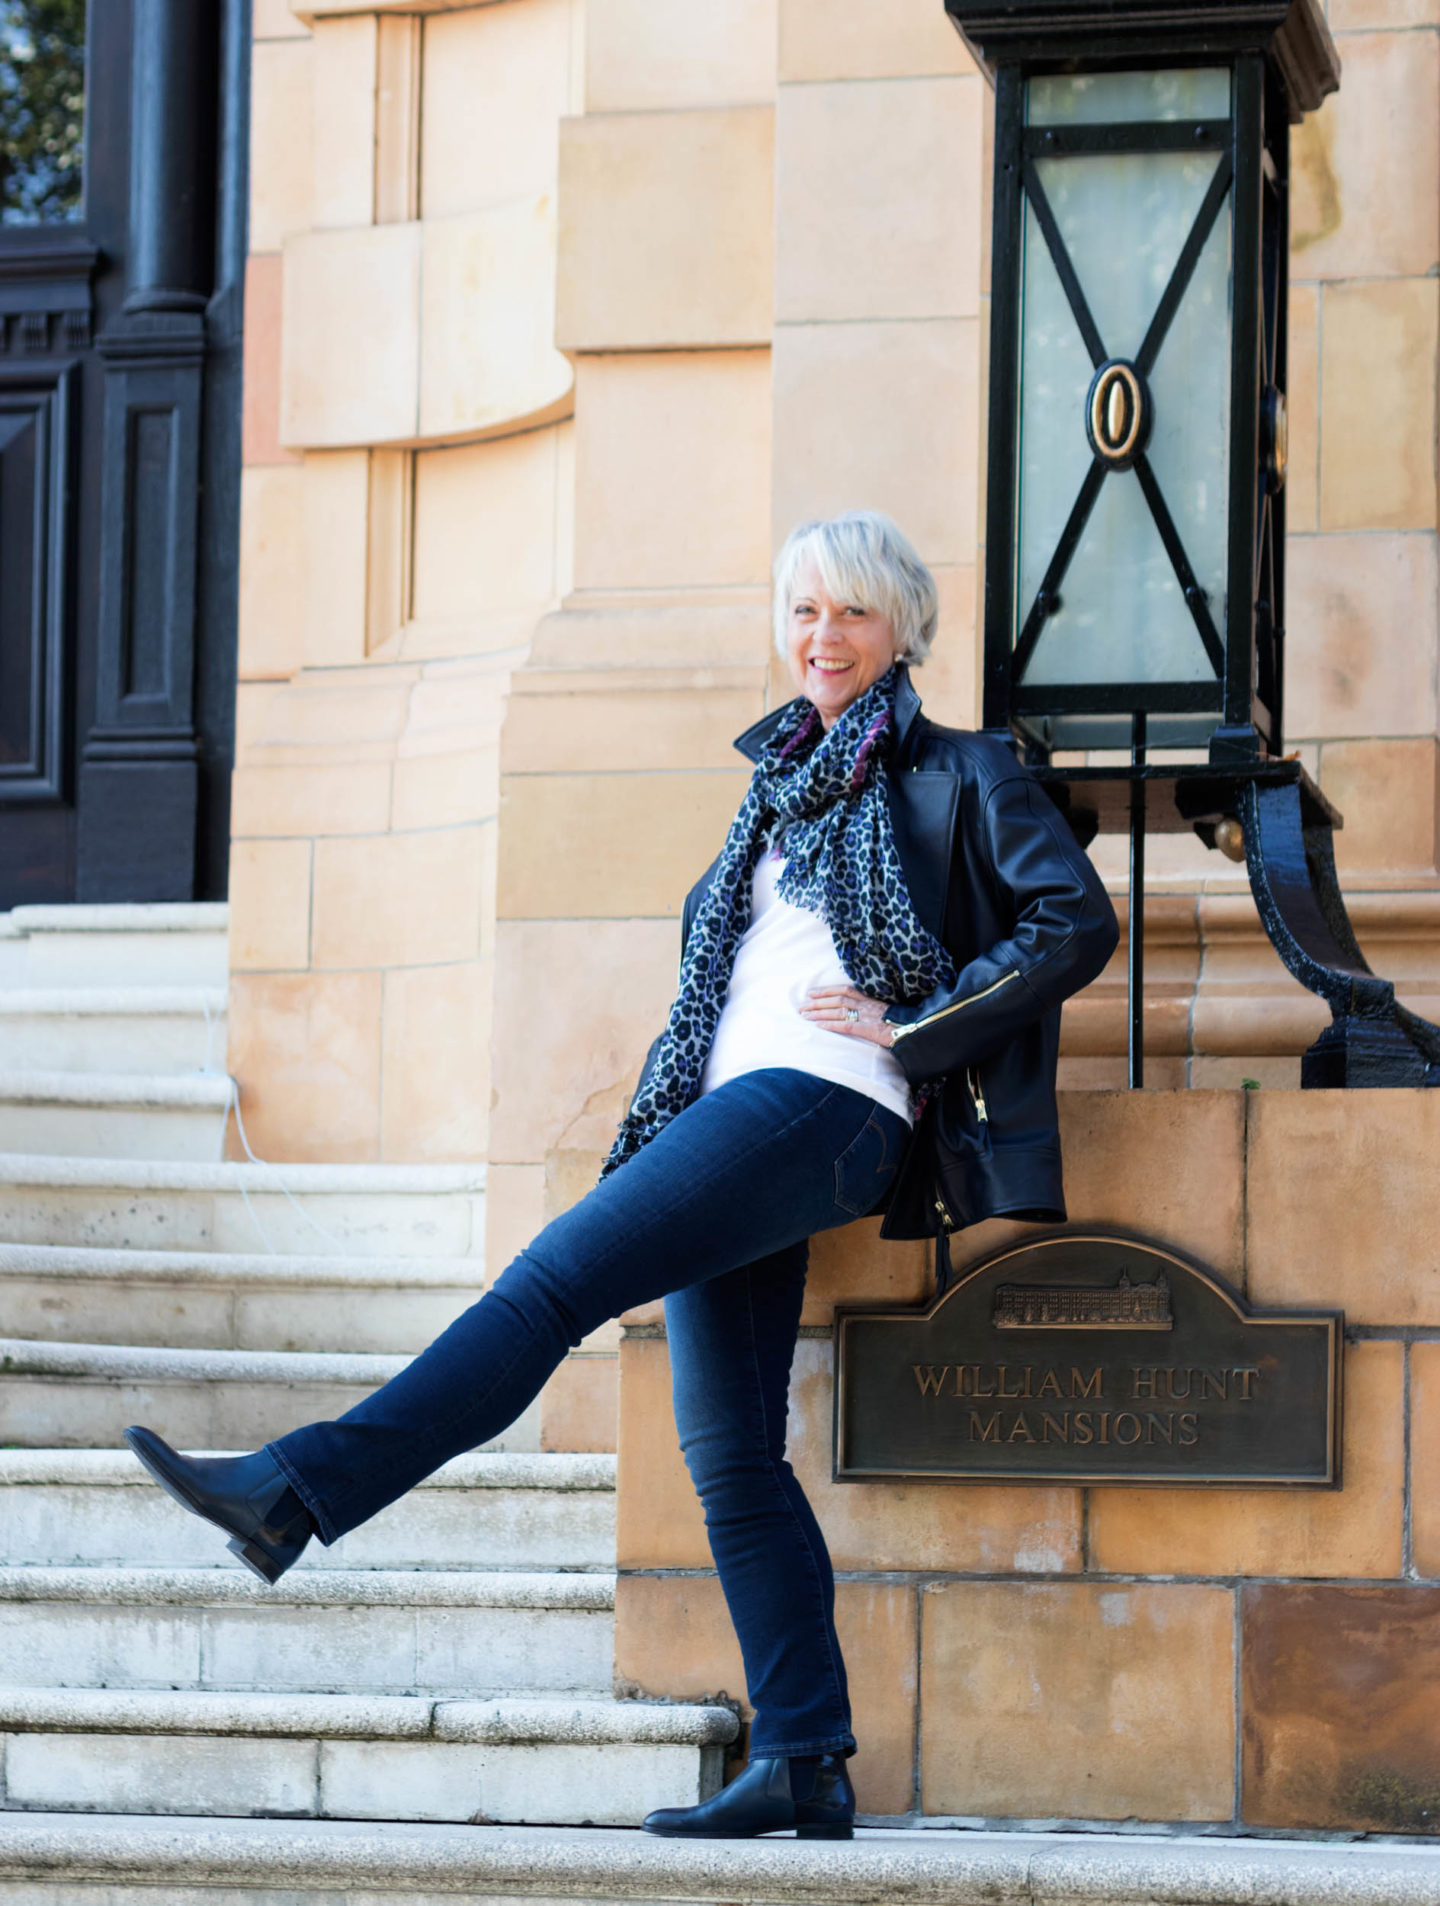 Wearing a leather biker jacket at any age - Chic at any age